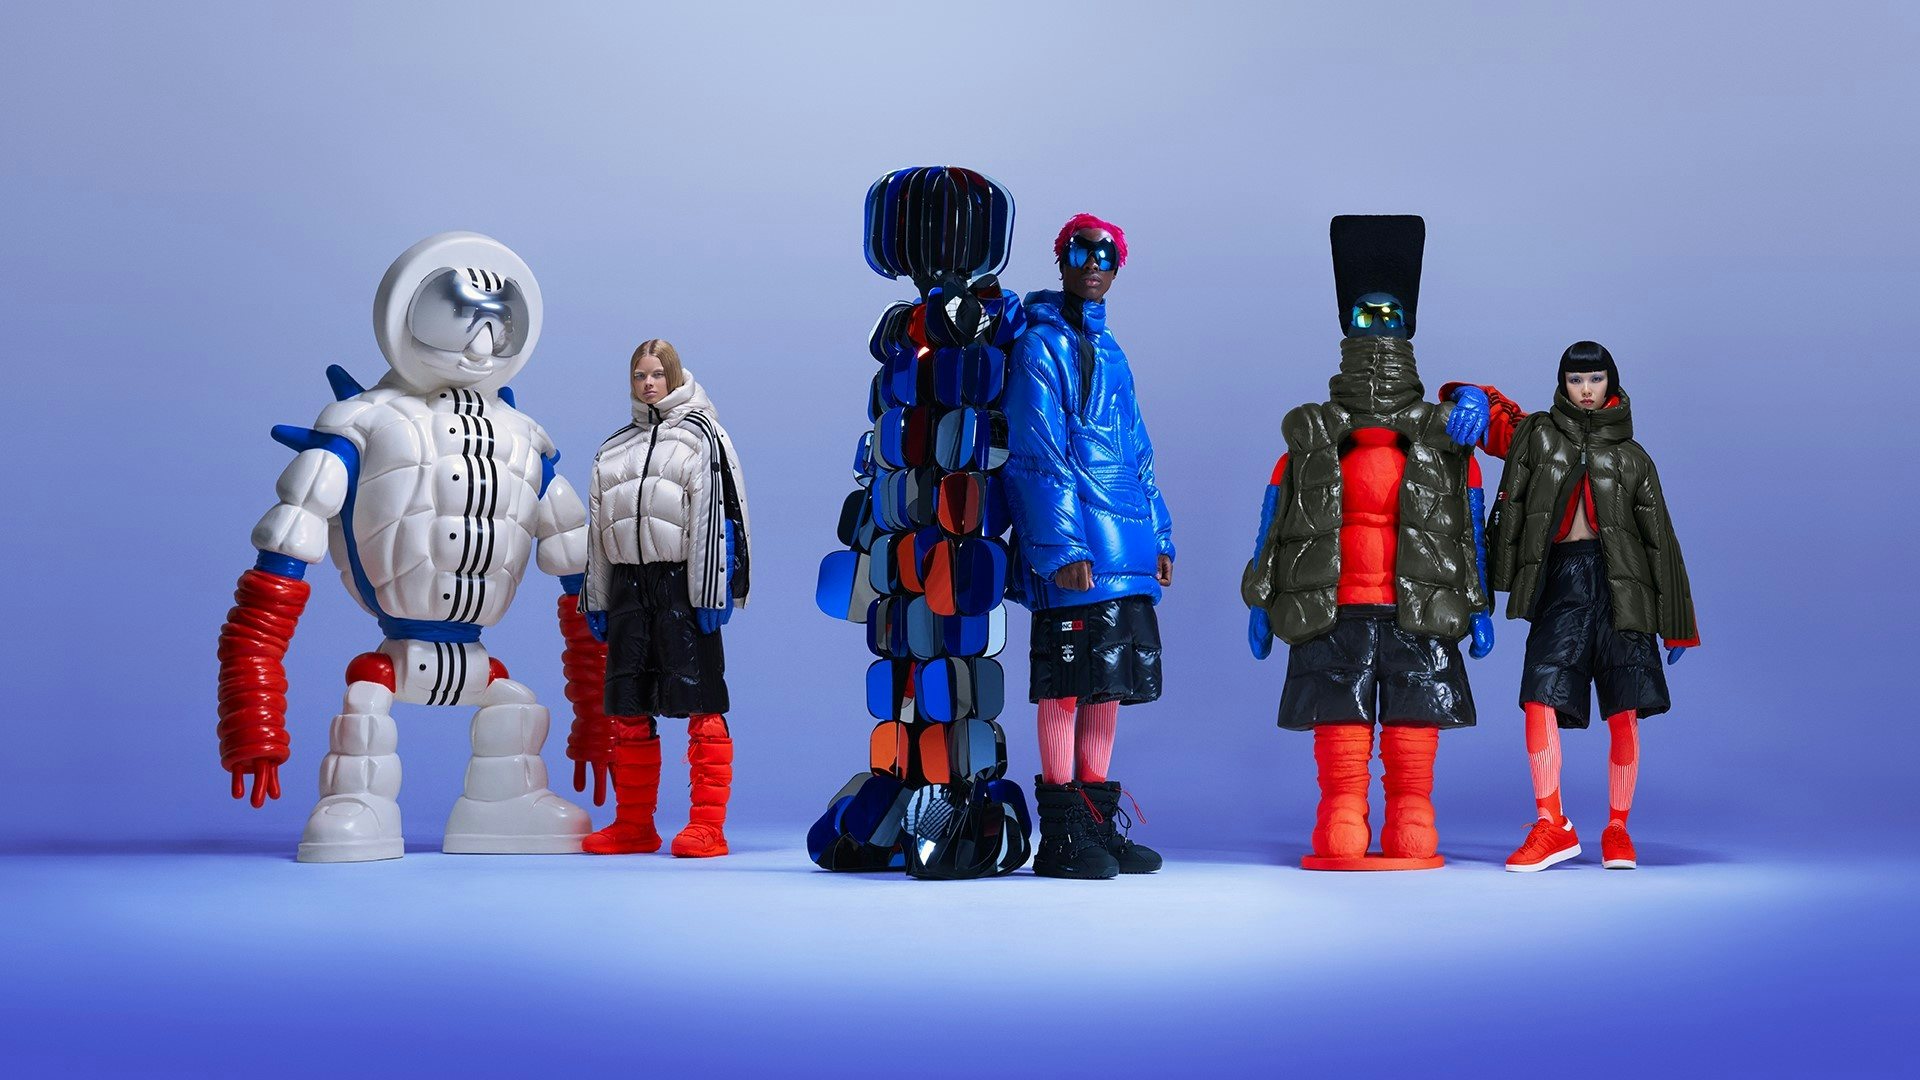 Manifesting the future of collaboration, Adidas and Moncler’s latest NFT and AI-powered tie-up offers a lesson in how to leverage innovation, brand power, and co-creation through Web3. Photo: Adidas